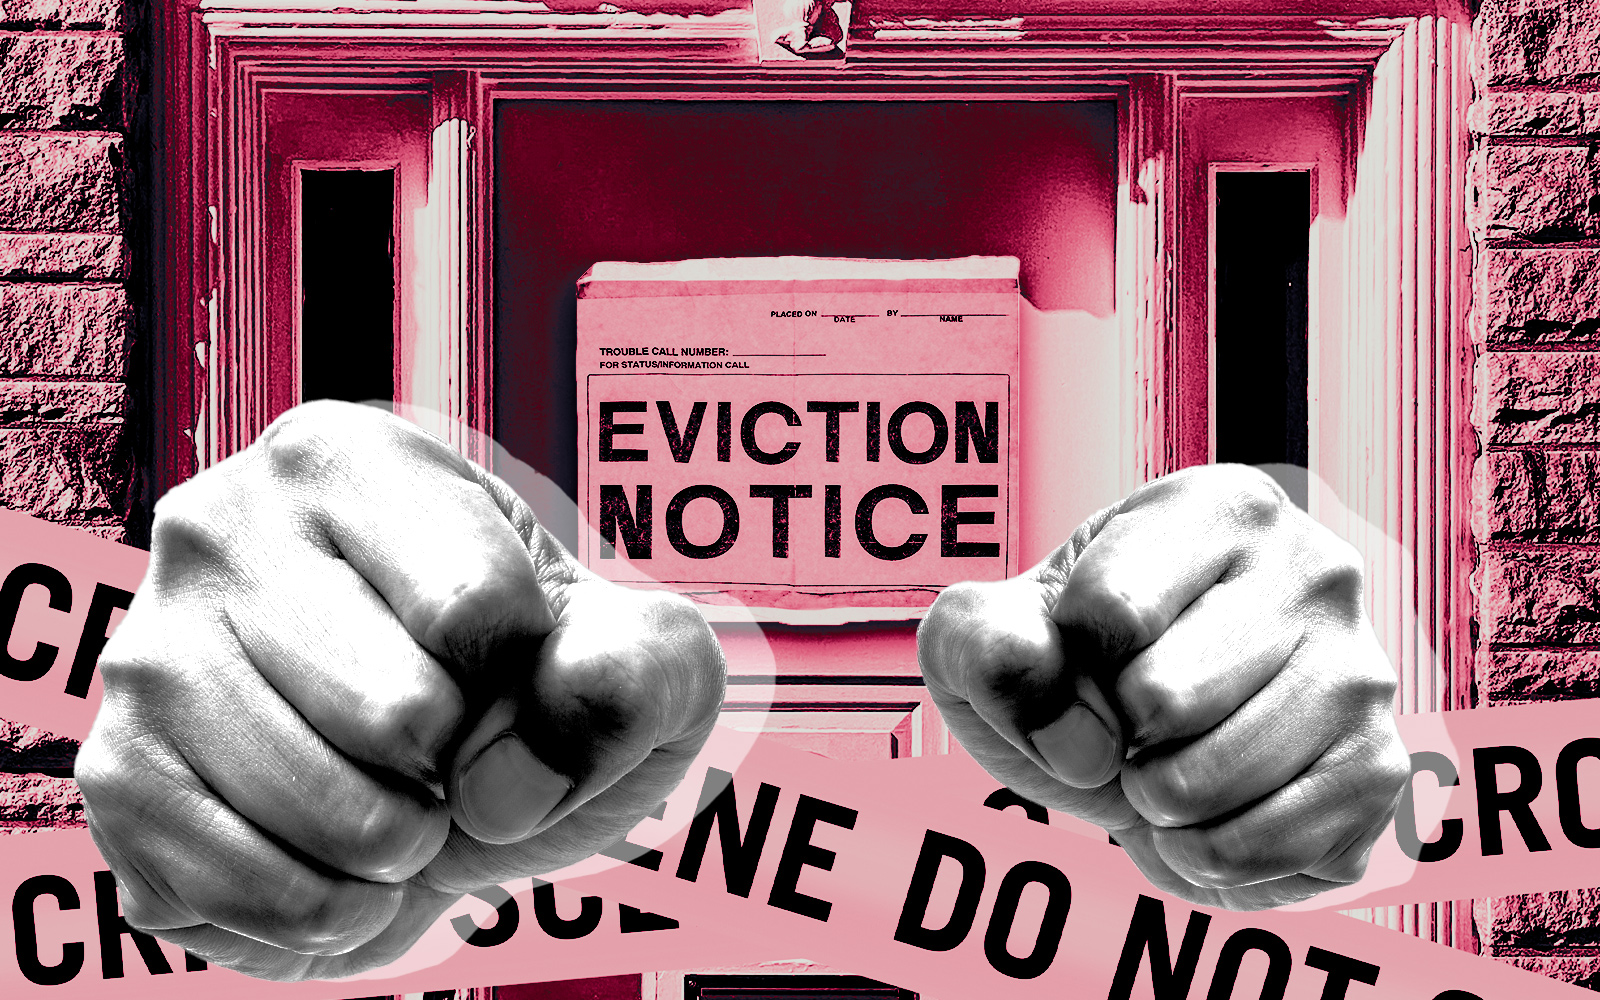 “He just came to get his money”: Landlord murdered mid-eviction